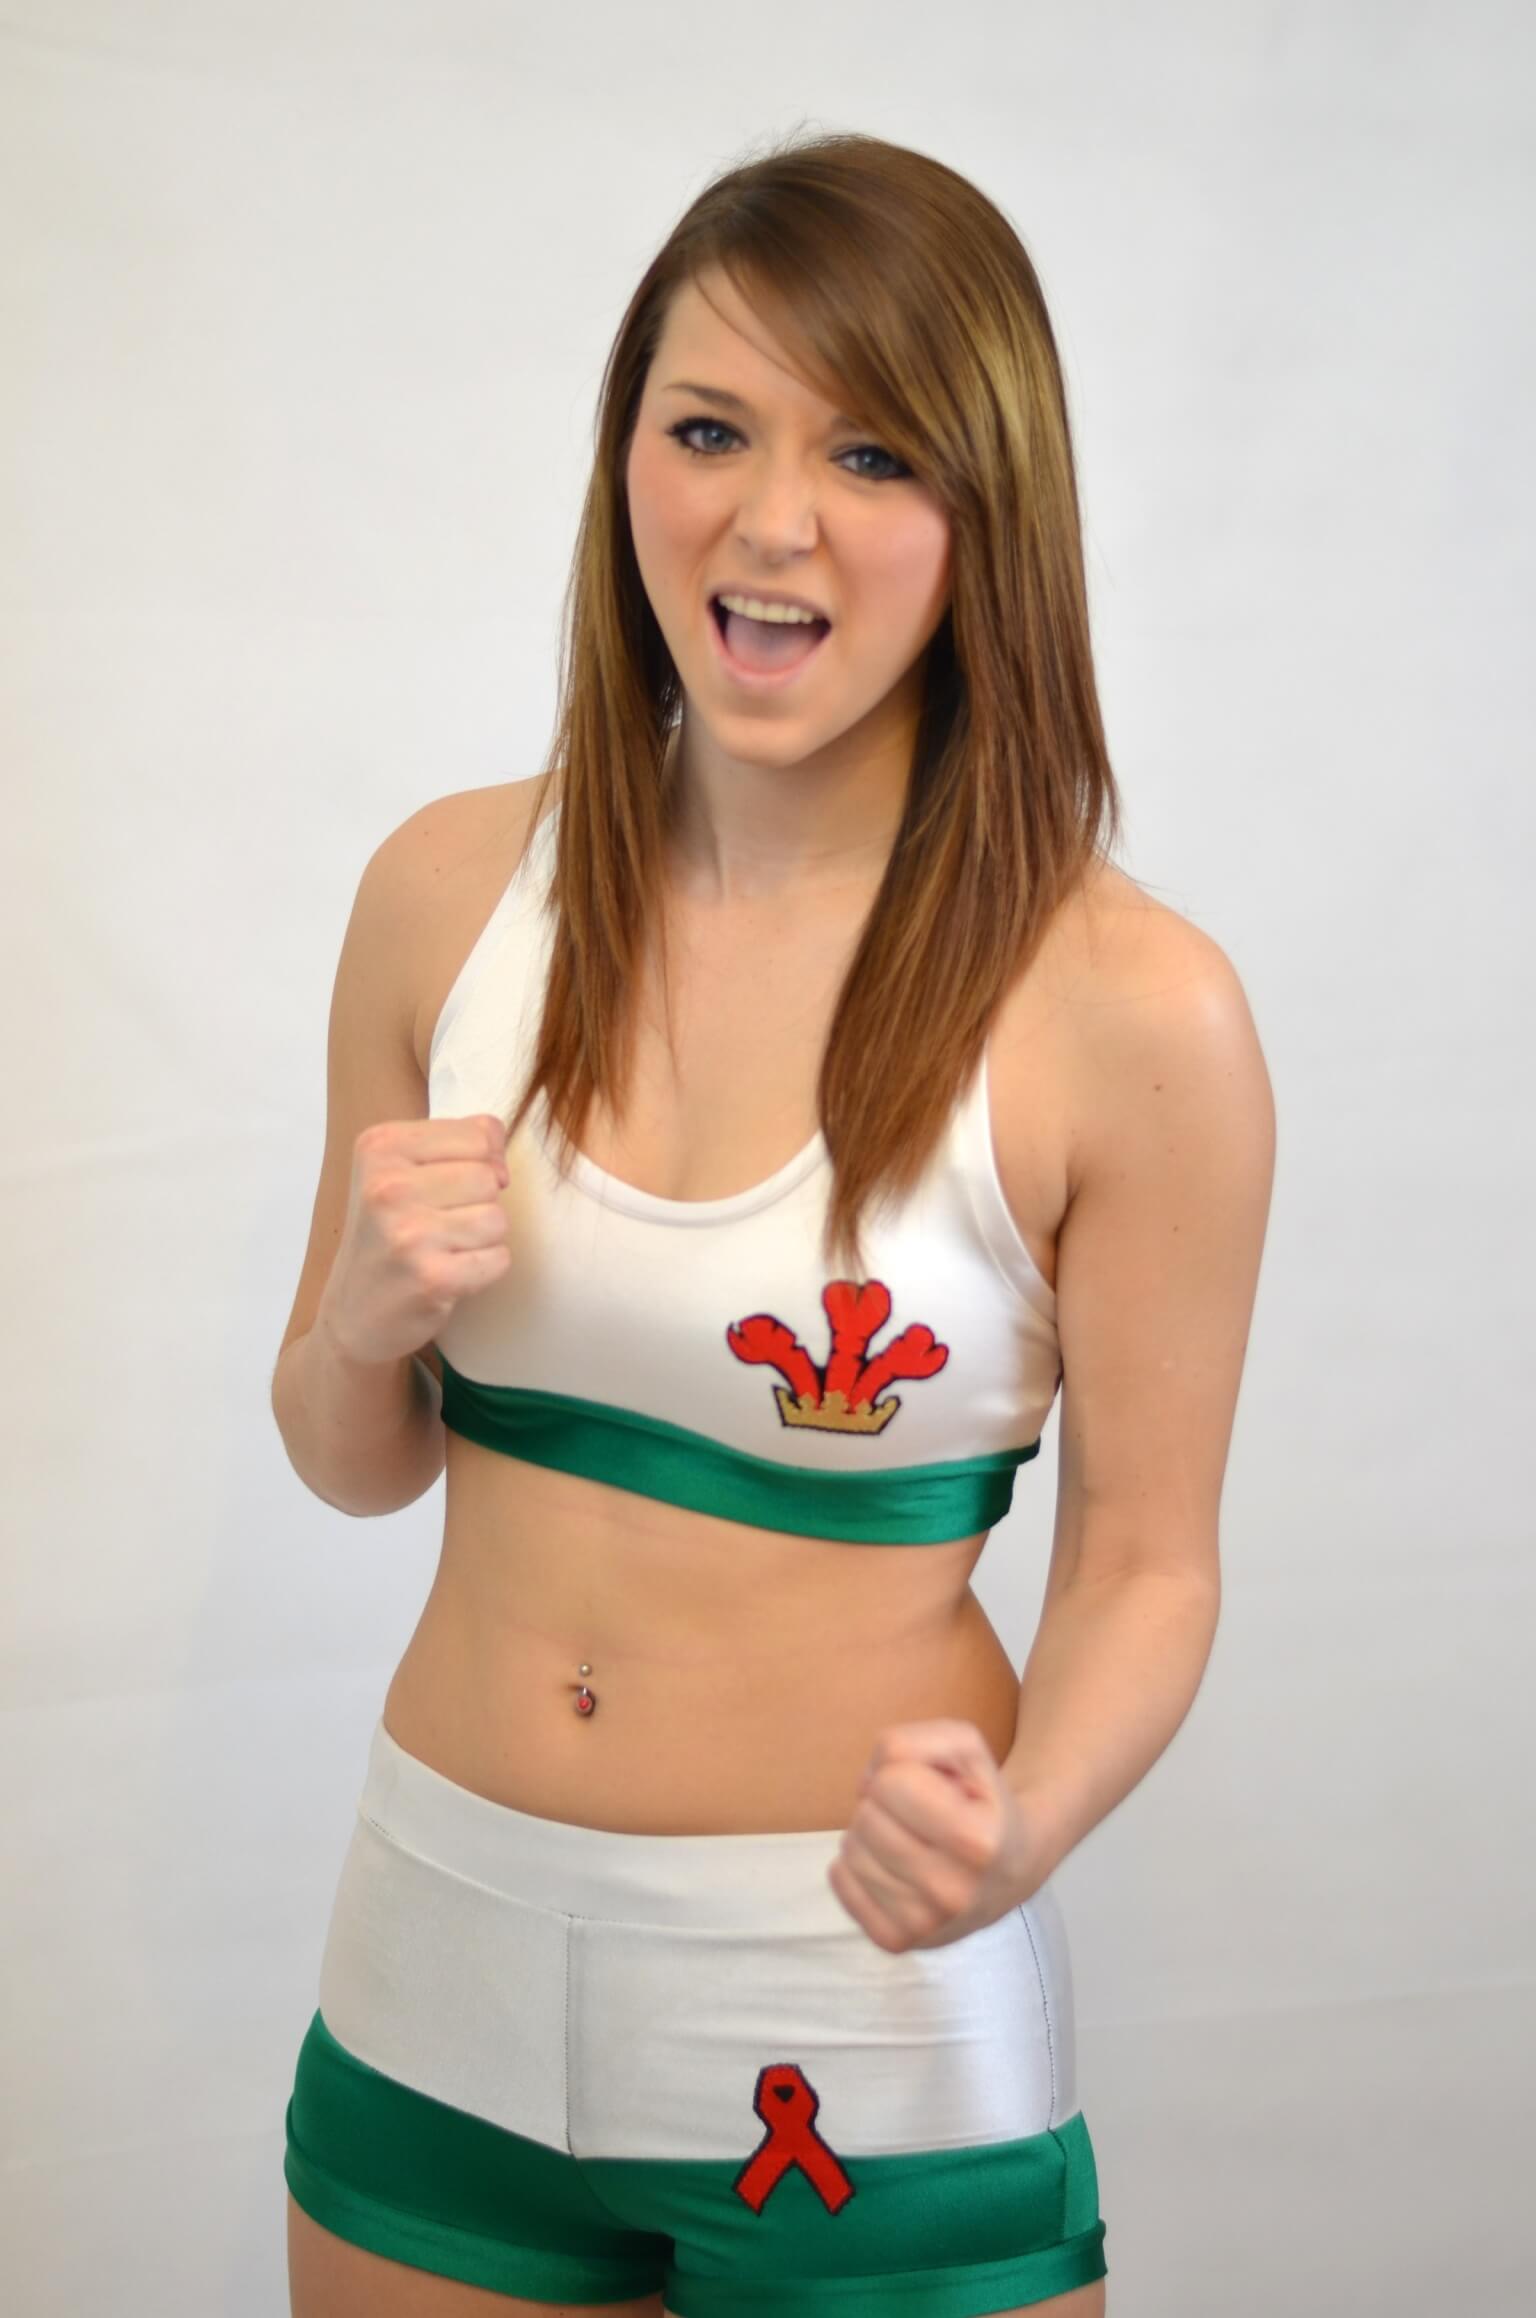 55+ Hot Pictures Of Tegan Nox Which Are Going To Make You Want Her Badly | Best Of Comic Books